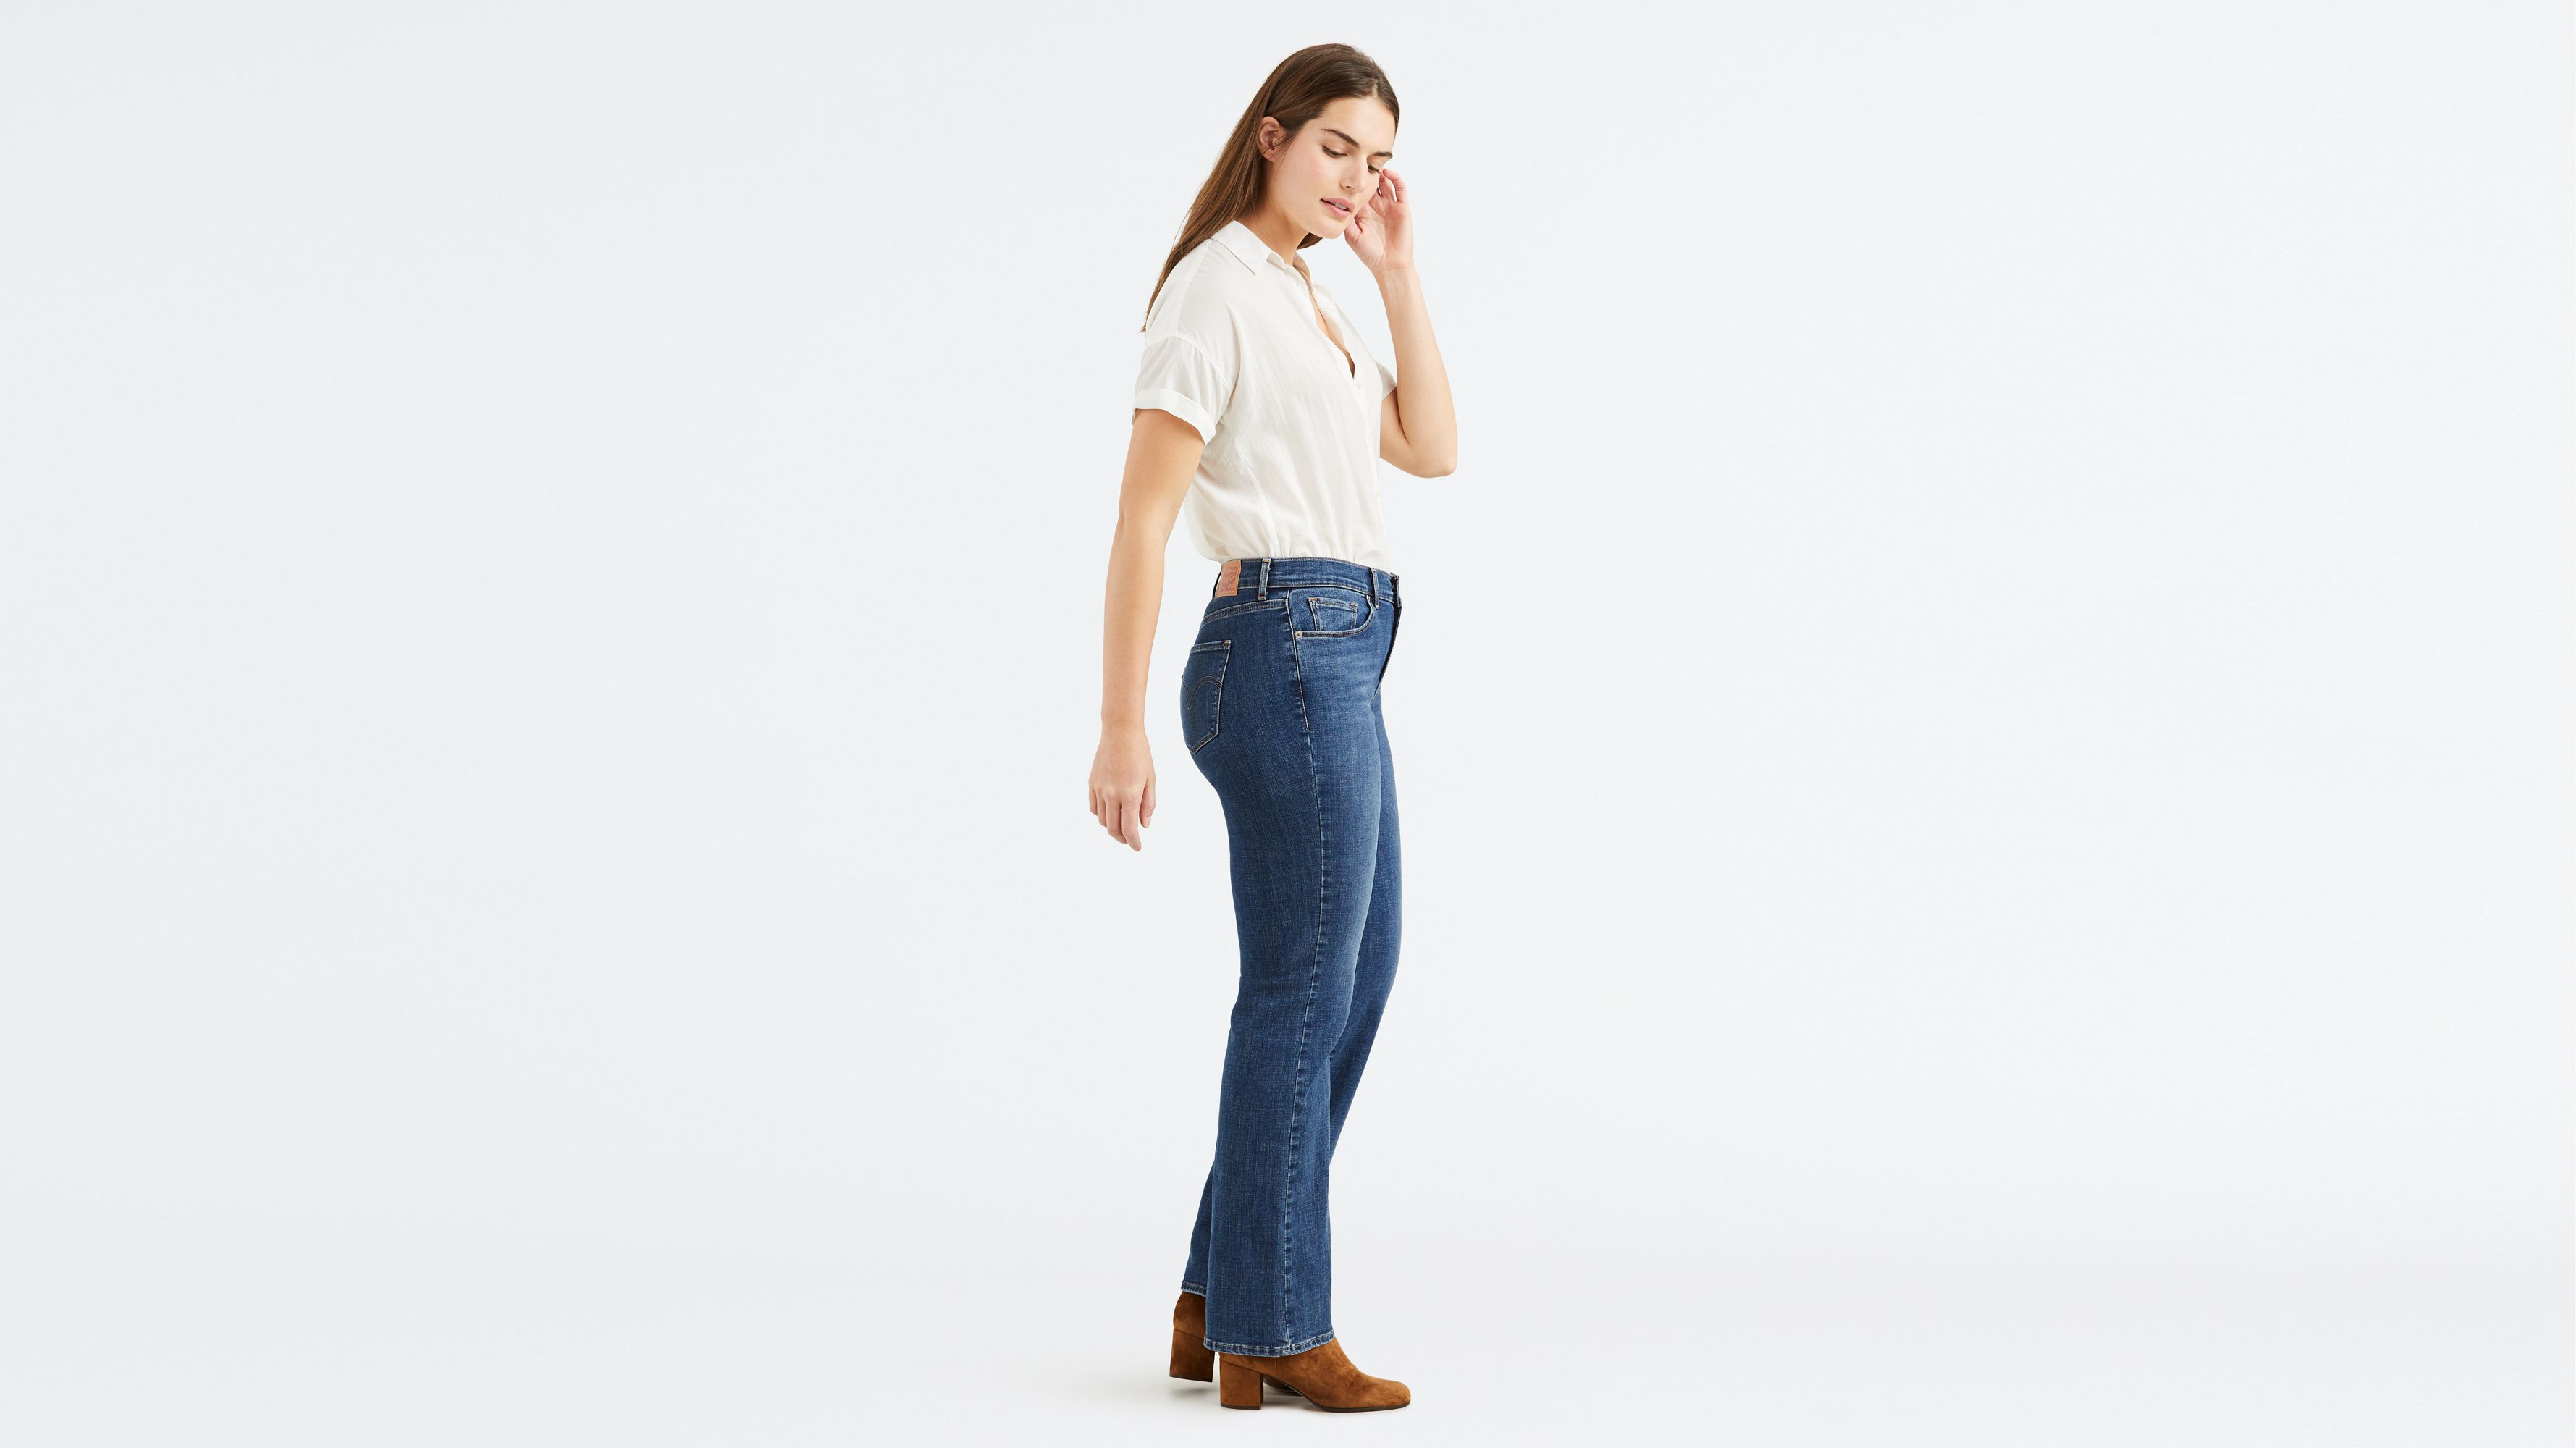 levi's classic bootcut womens jeans